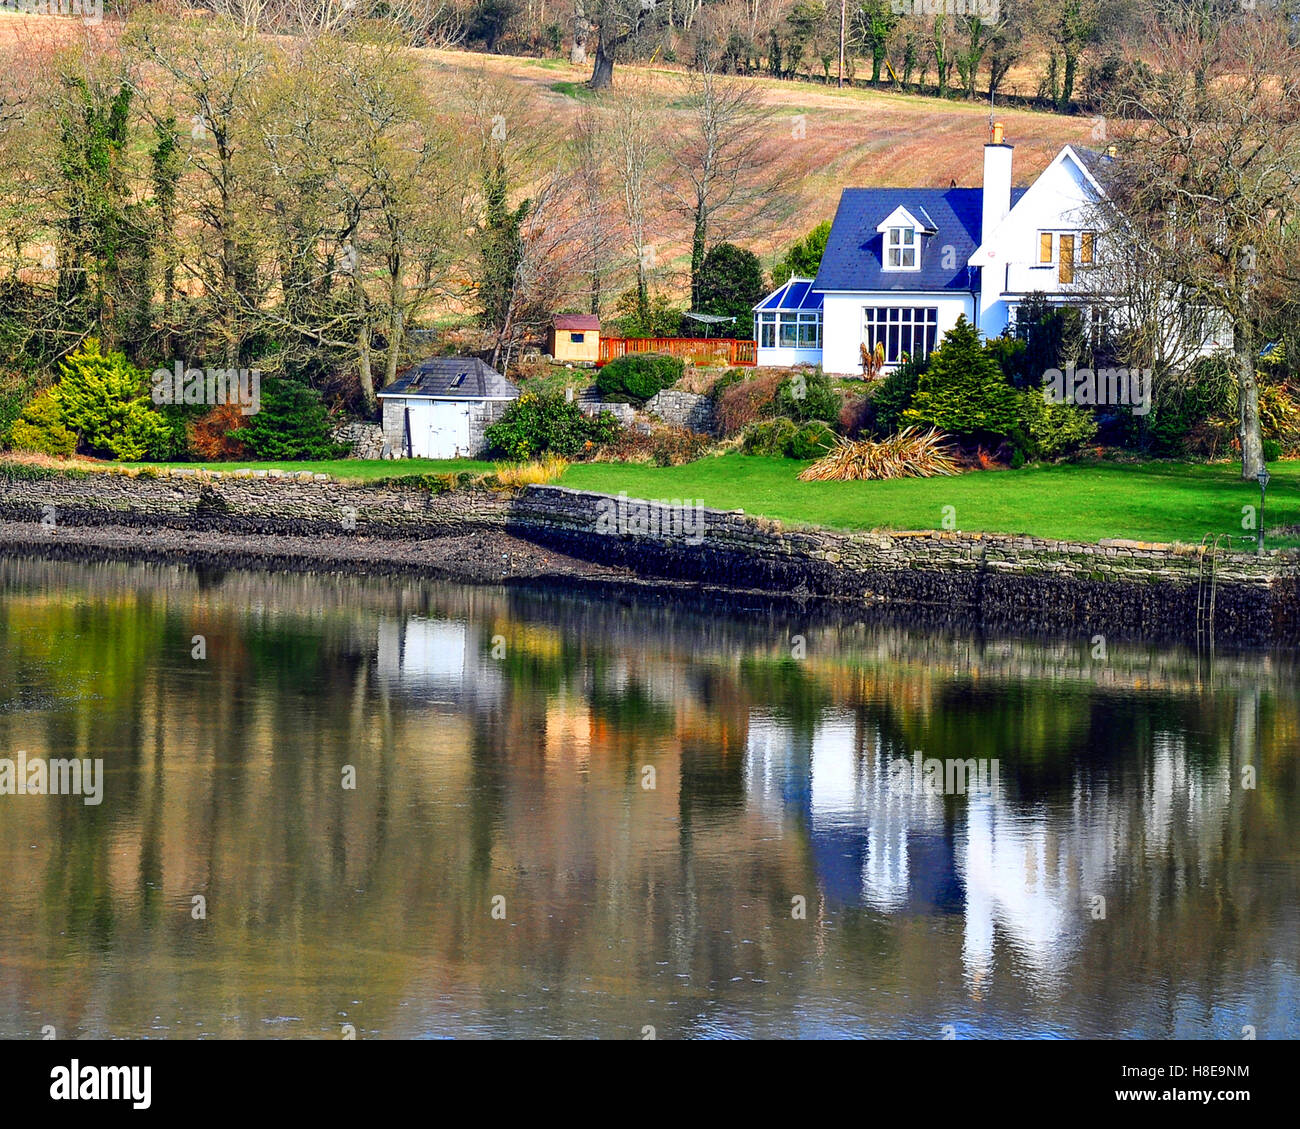 Country house or riverside house on the bank of a river, Cork, Ireland. Stock Photo